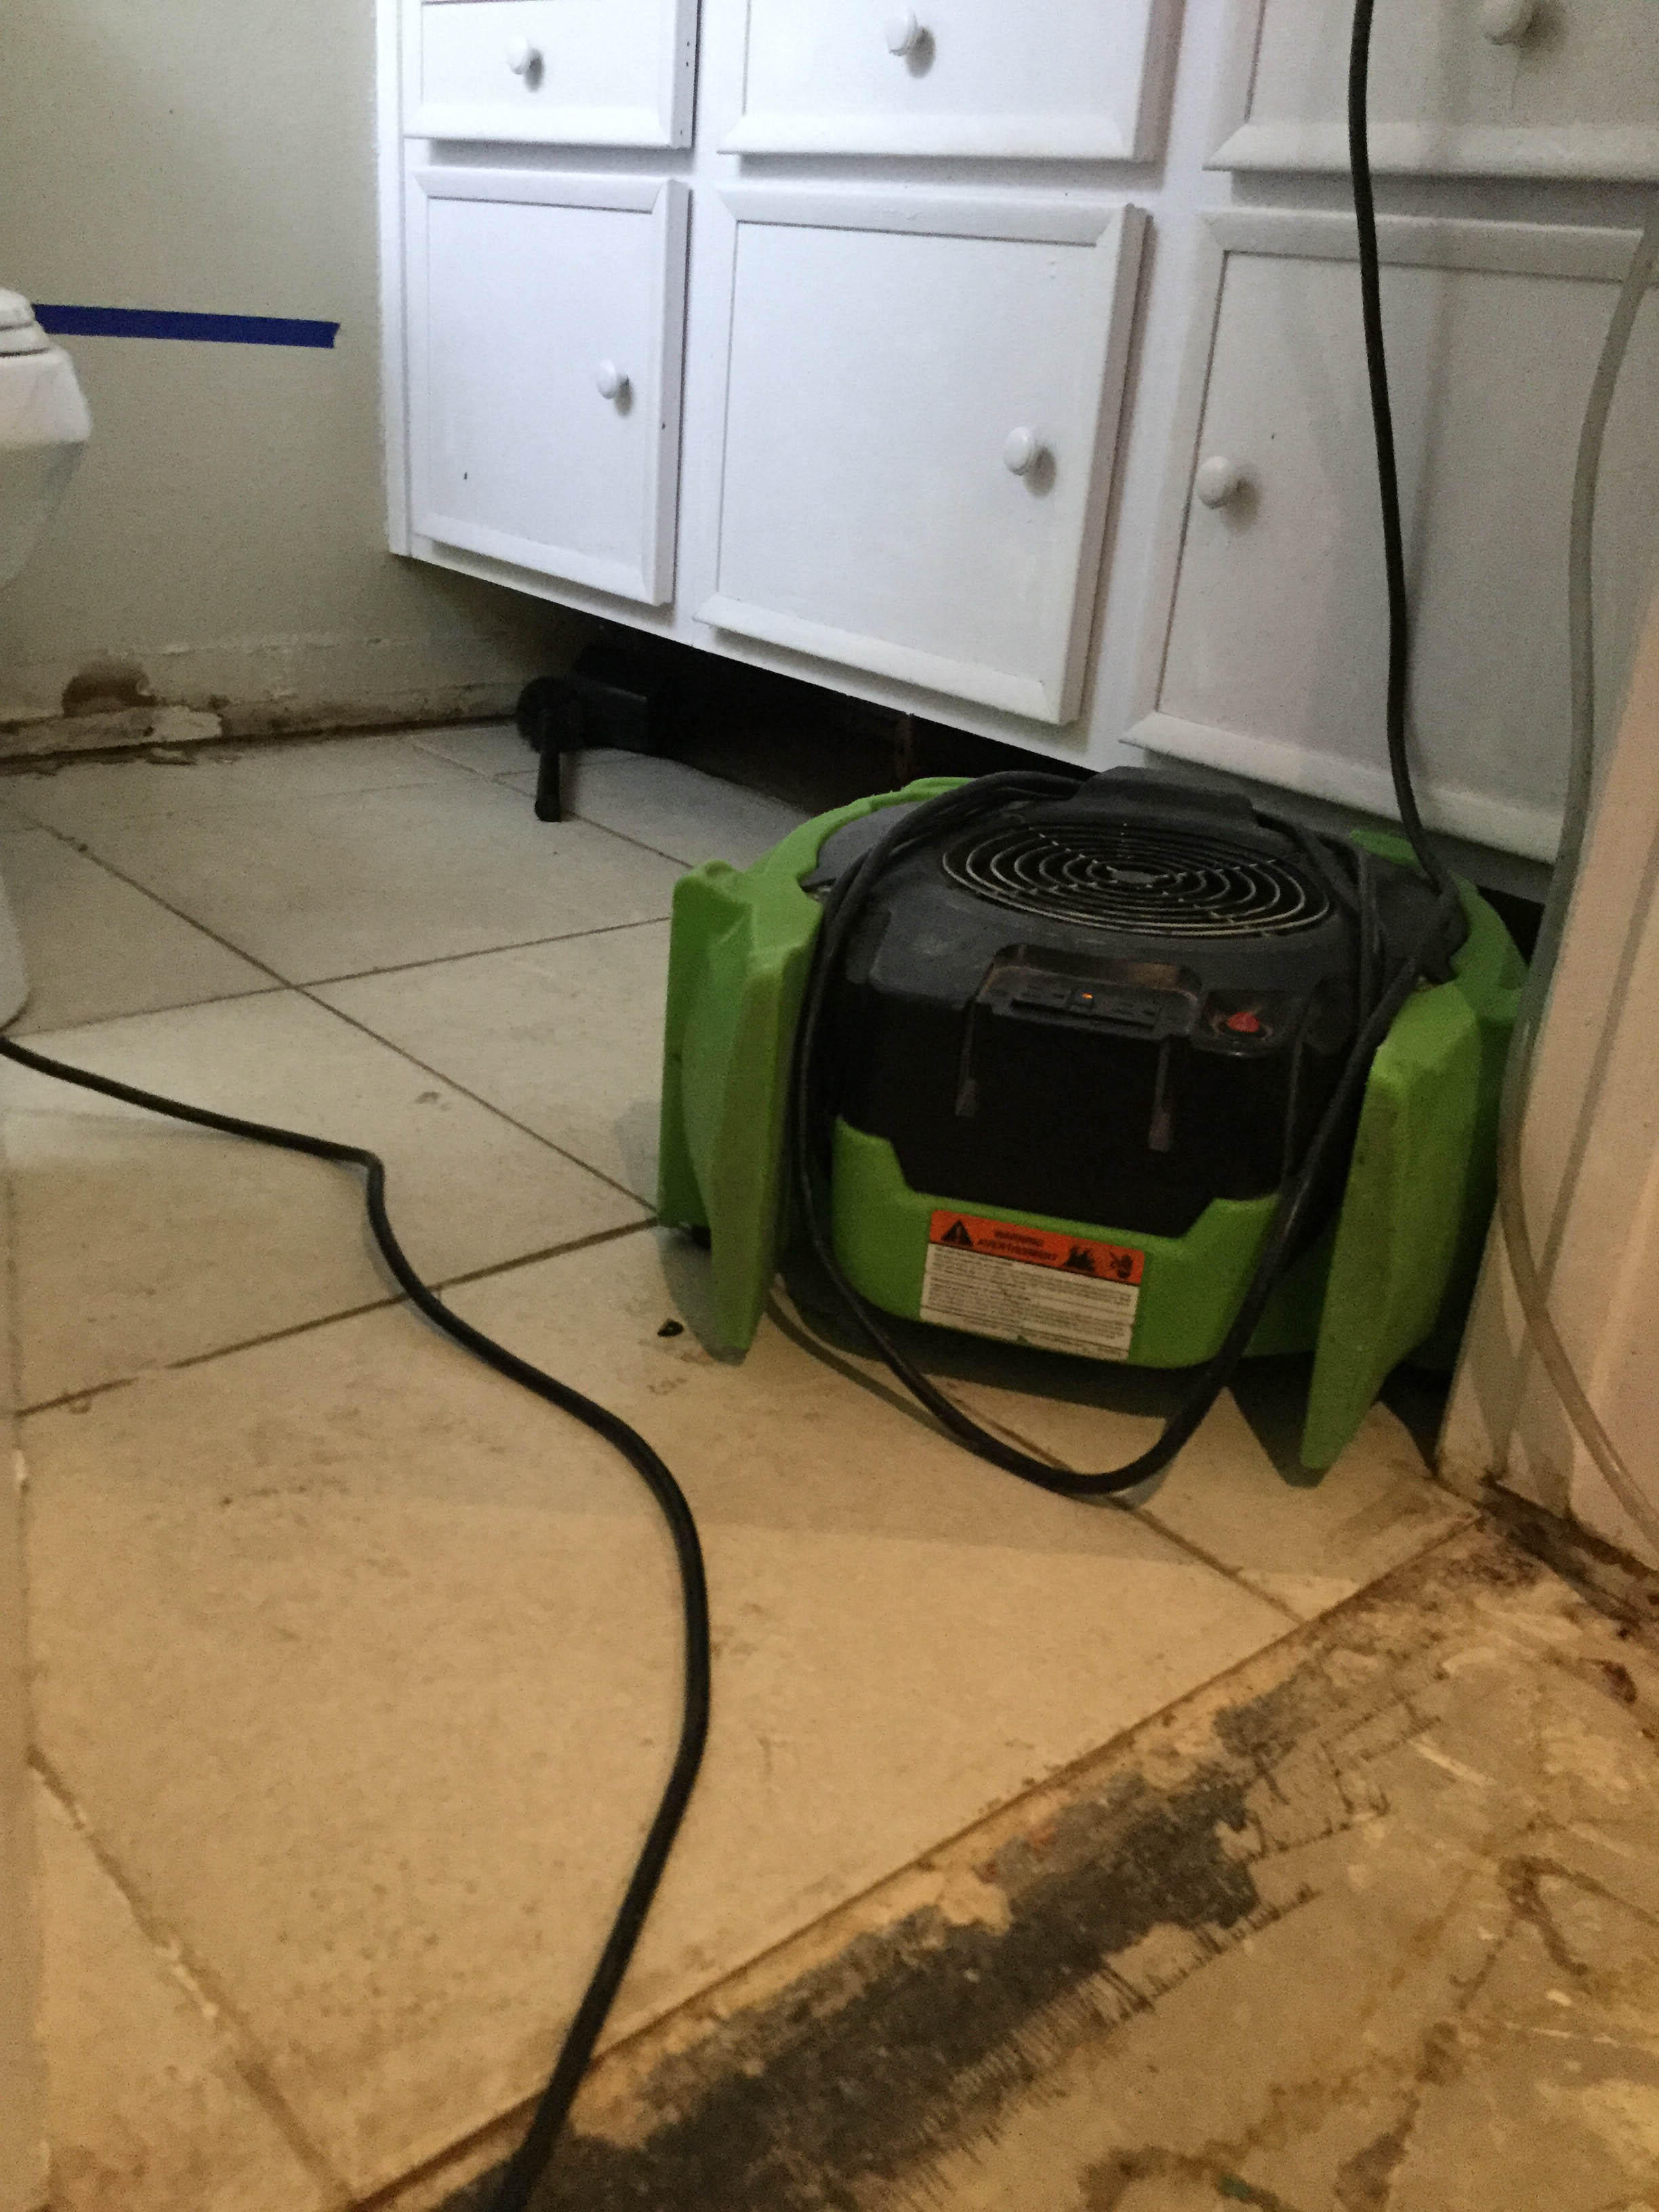 SERVPRO of Laguna Beach / Dana Point can respond immediately to your water damage emergency.